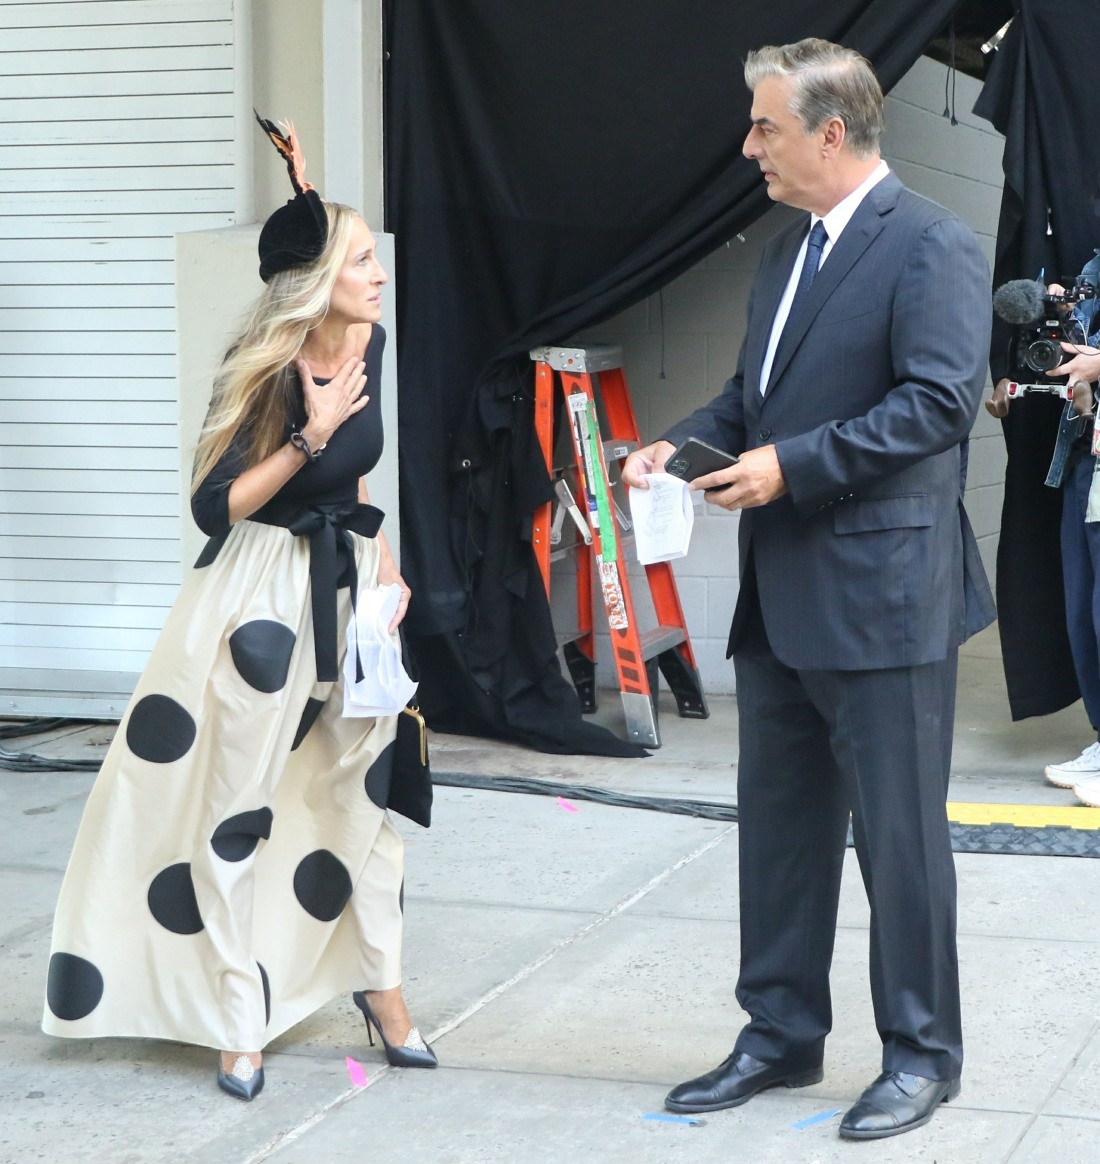 Sarah Jessica Parker and Chris Noth shoot scenes for upcoming 'Sex And The City' reboot 'And Just Like That'